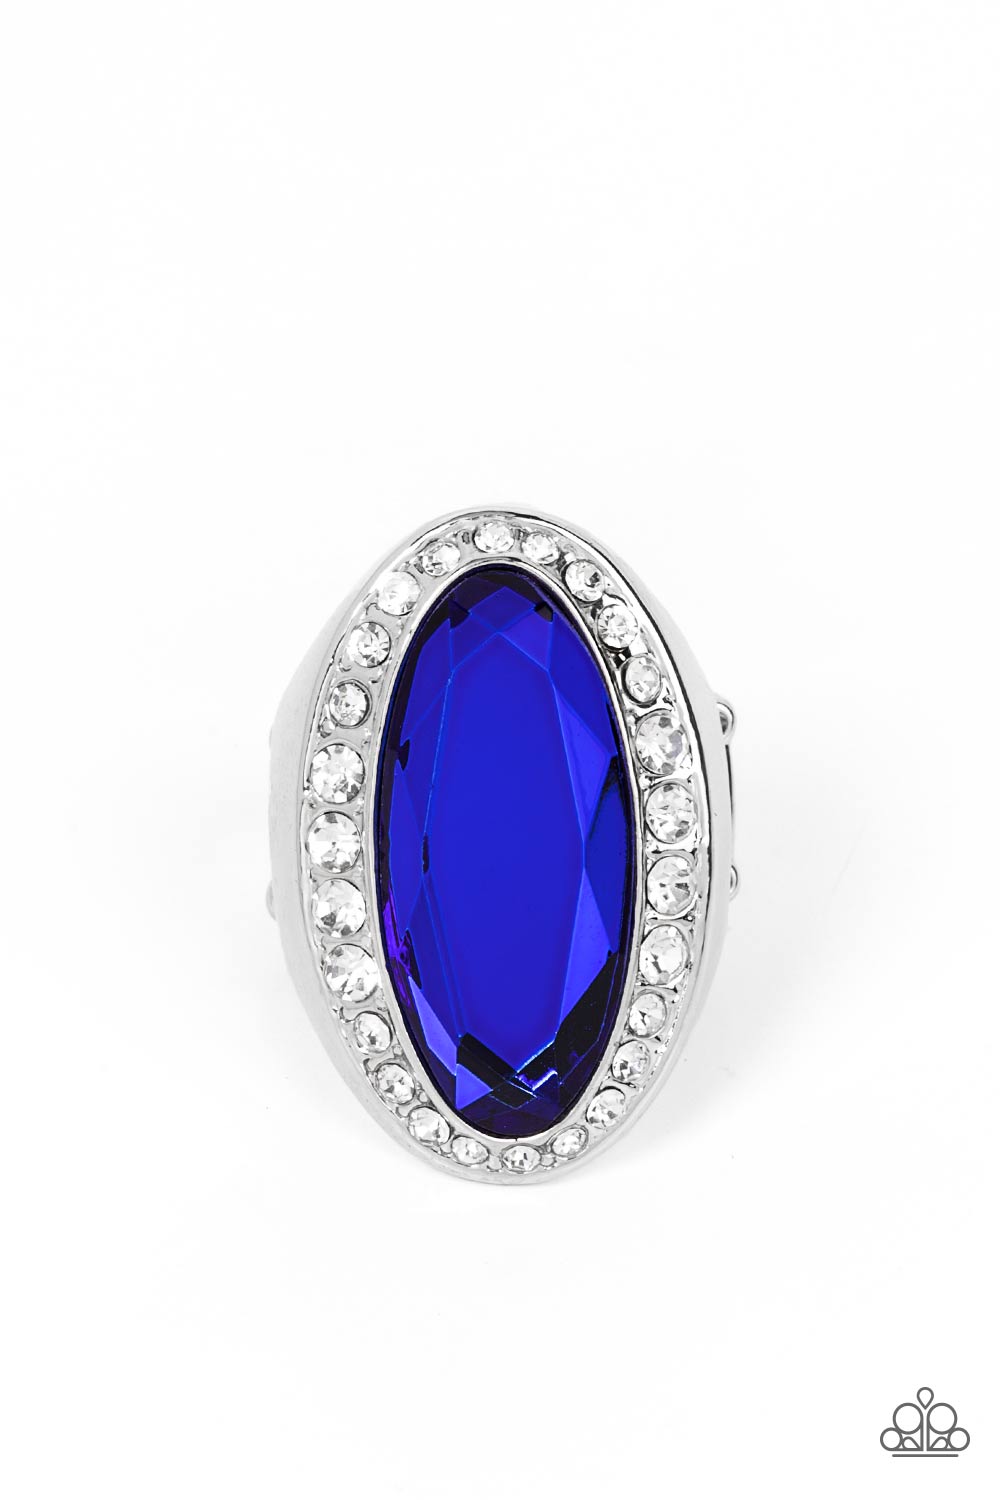 Bordered by a glitzy ring of white rhinestones, an oblong blue gem embellishes the center of a dramatically oversized silver frame for a blinding finish. Features a stretchy band for a flexible fit.  Sold as one individual ring.